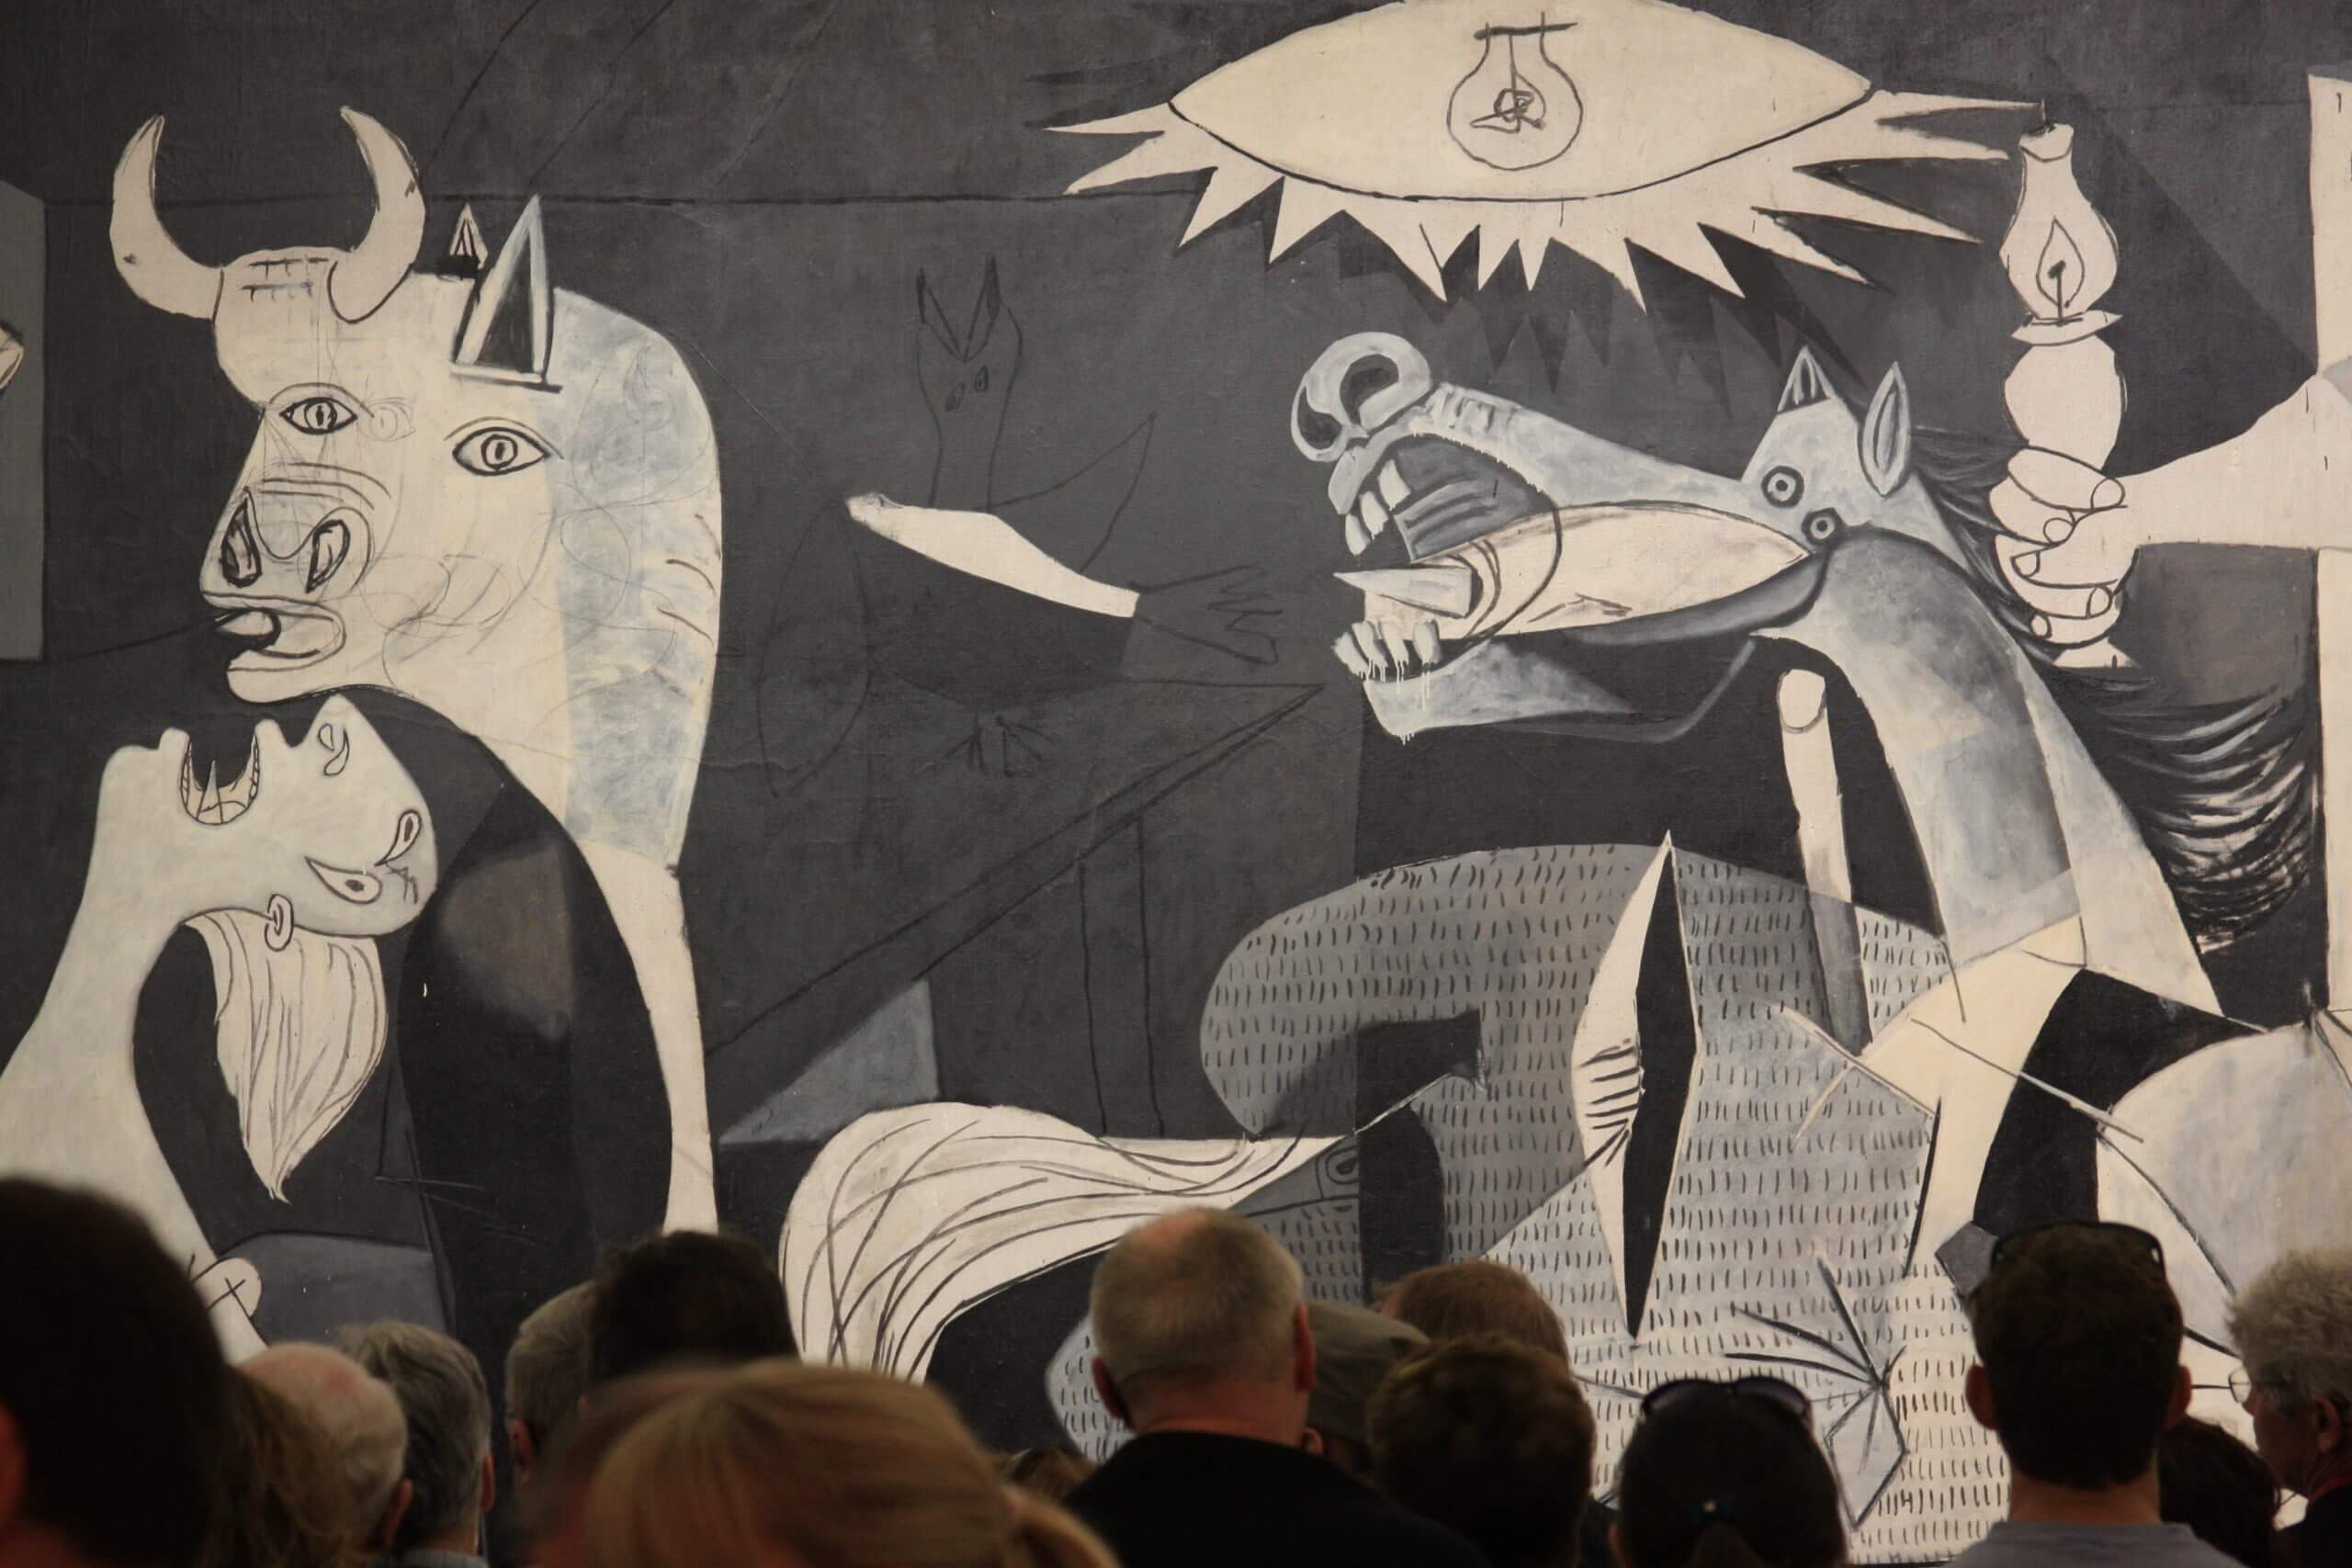 How Picasso's Guernica Painting Changed Our View On War